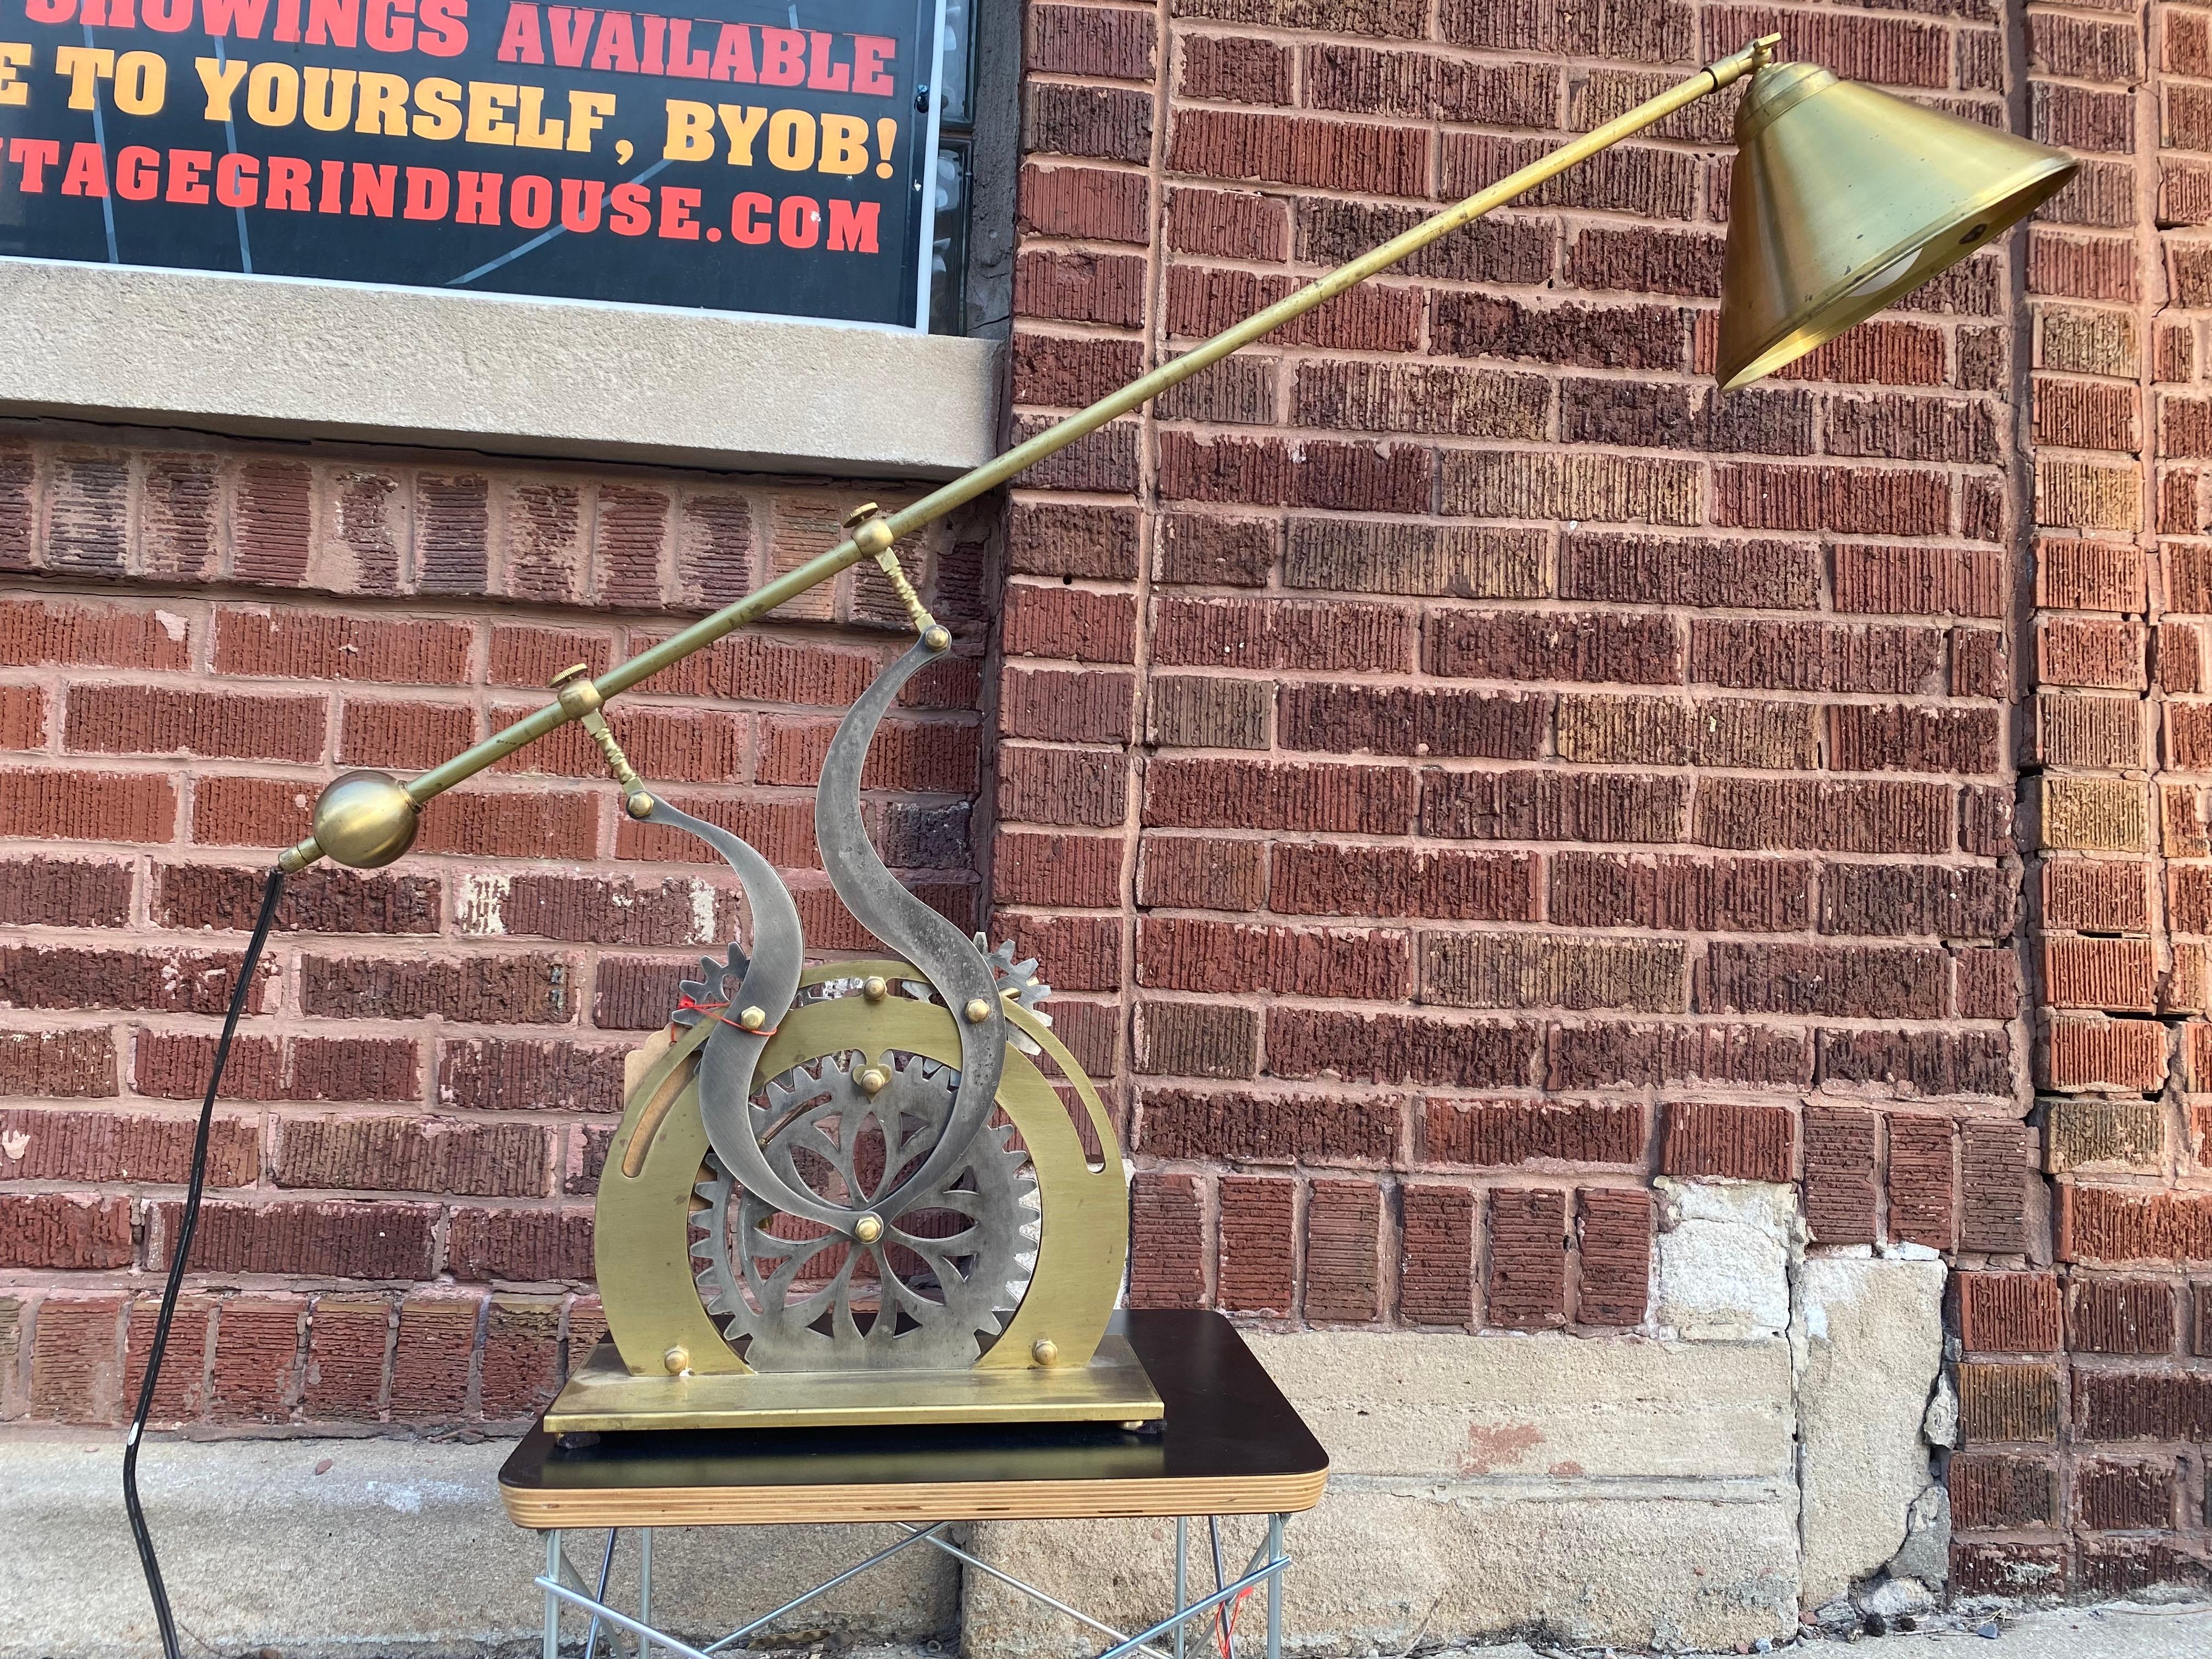 Vintage Industrial Steampunk Rotating Gear Adjustable Brass Table Lamp

This rustic, industrial, steampunk table lamp features an exposed cast iron & brass skeleton gear body and extendable retro neck. The gears make the lamp highly adjustable,